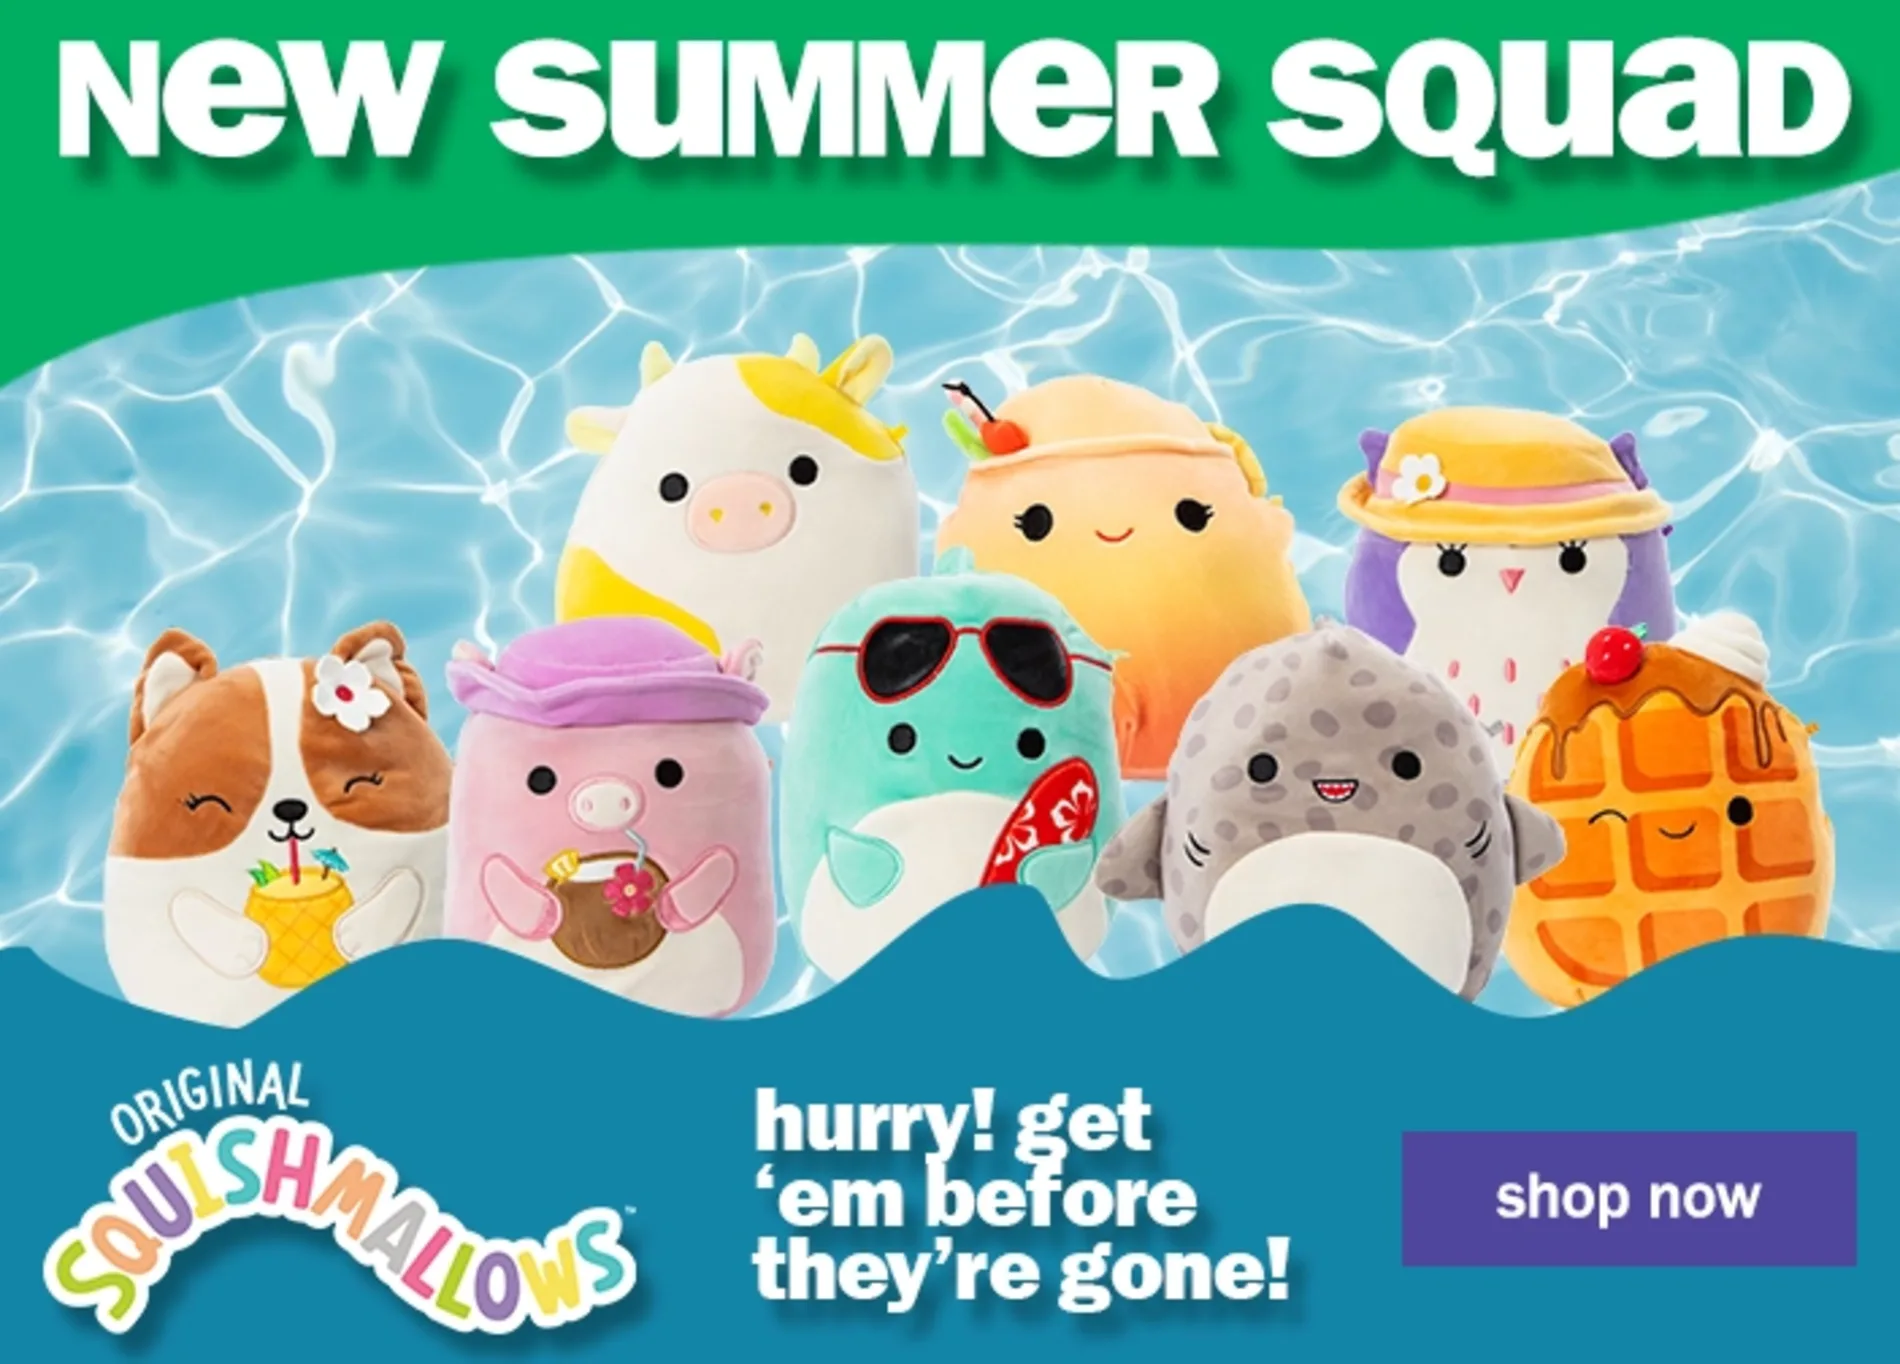 Original Squishmallows. New Summer Squad. Hurry! Get 'em Before They're Gone! Shop Now.